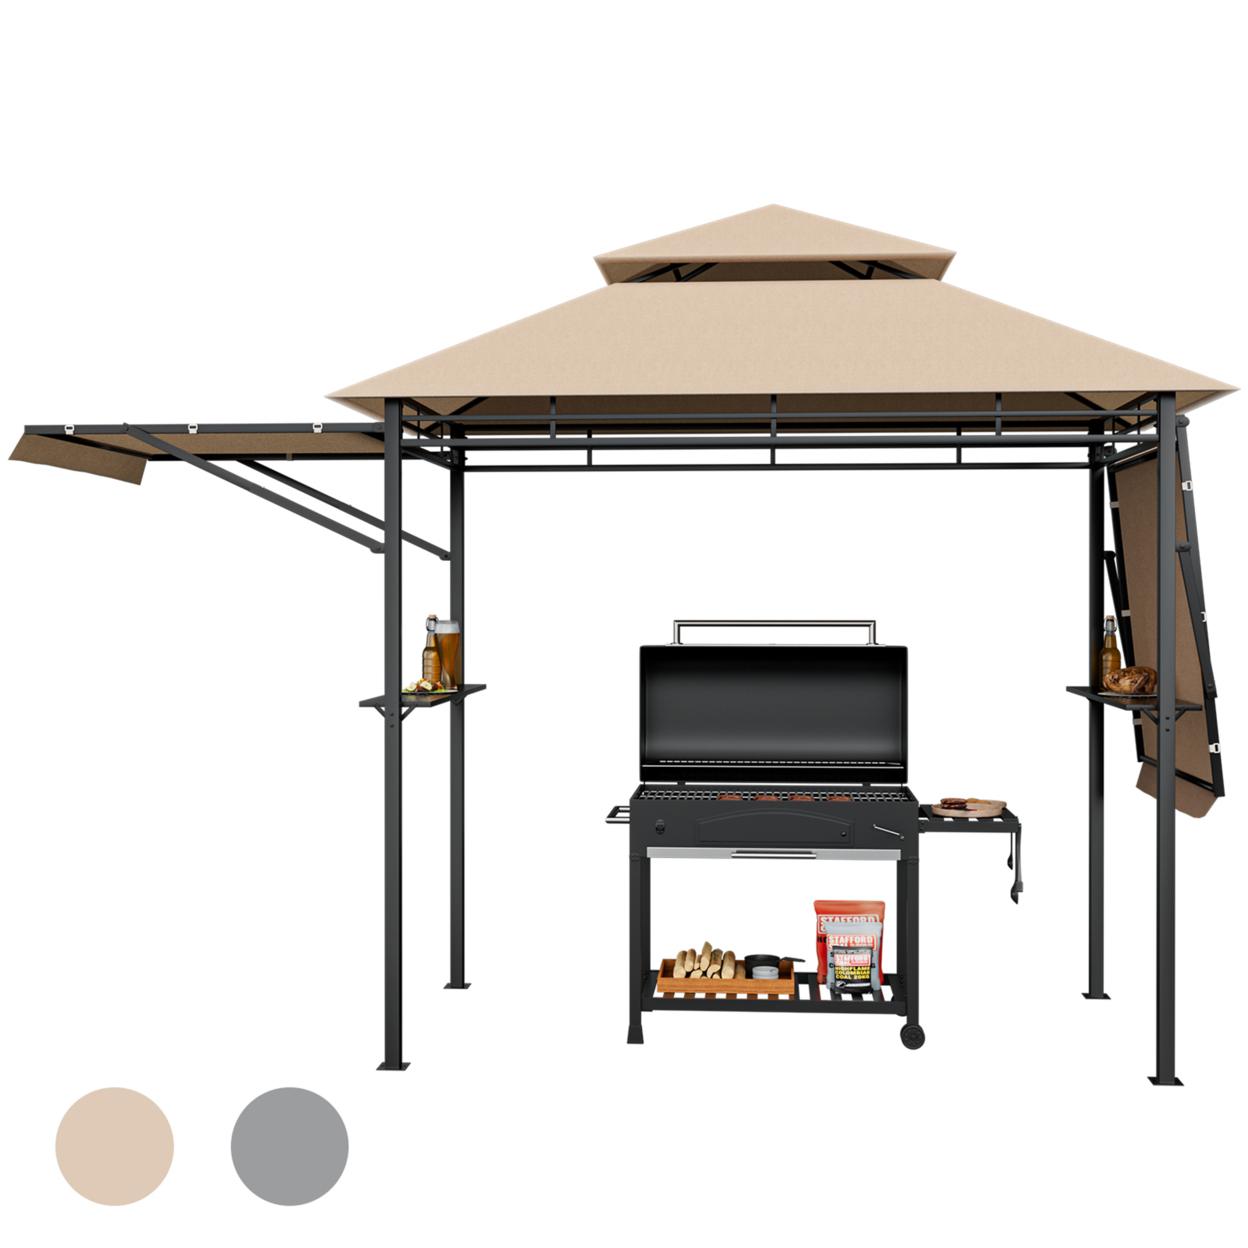 13.5' X 4' Patio BBQ Grill Gazebo Side Awnings Shelves 2-Tier Canopy Outdoor